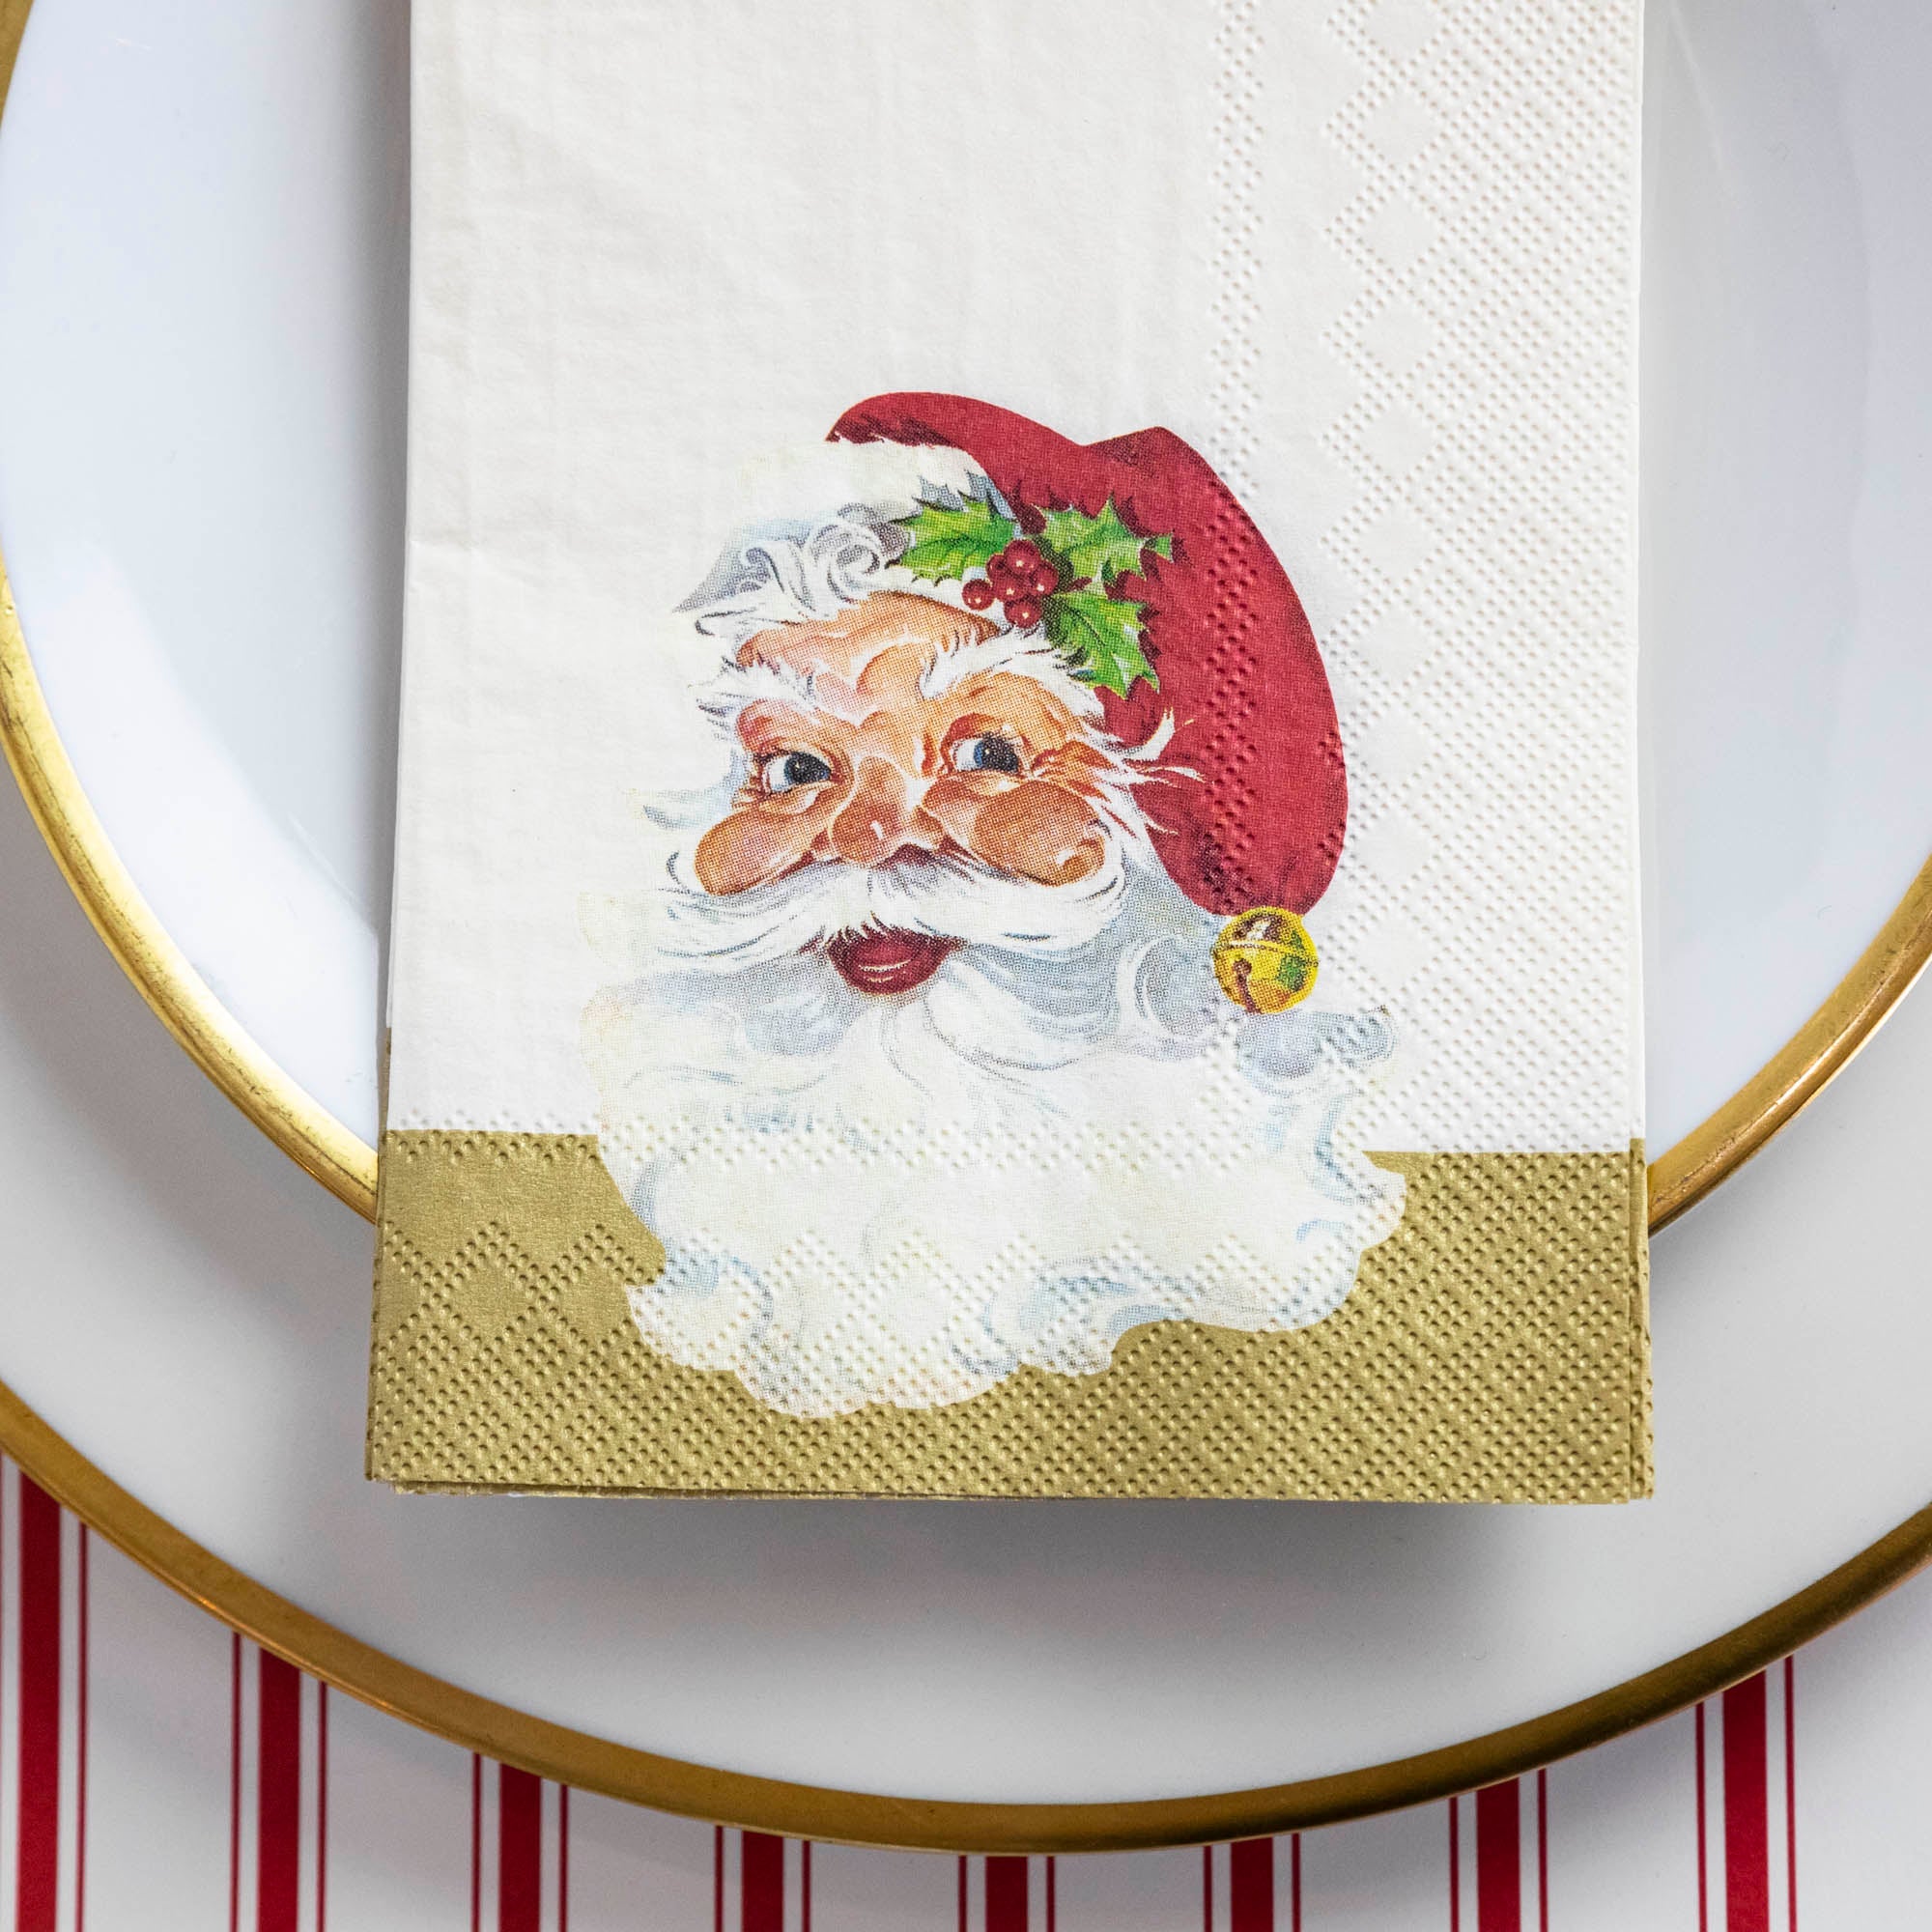 A festive Hester &amp; Cook Santa Napkin, perfect for adding holiday cheer to your table setting.